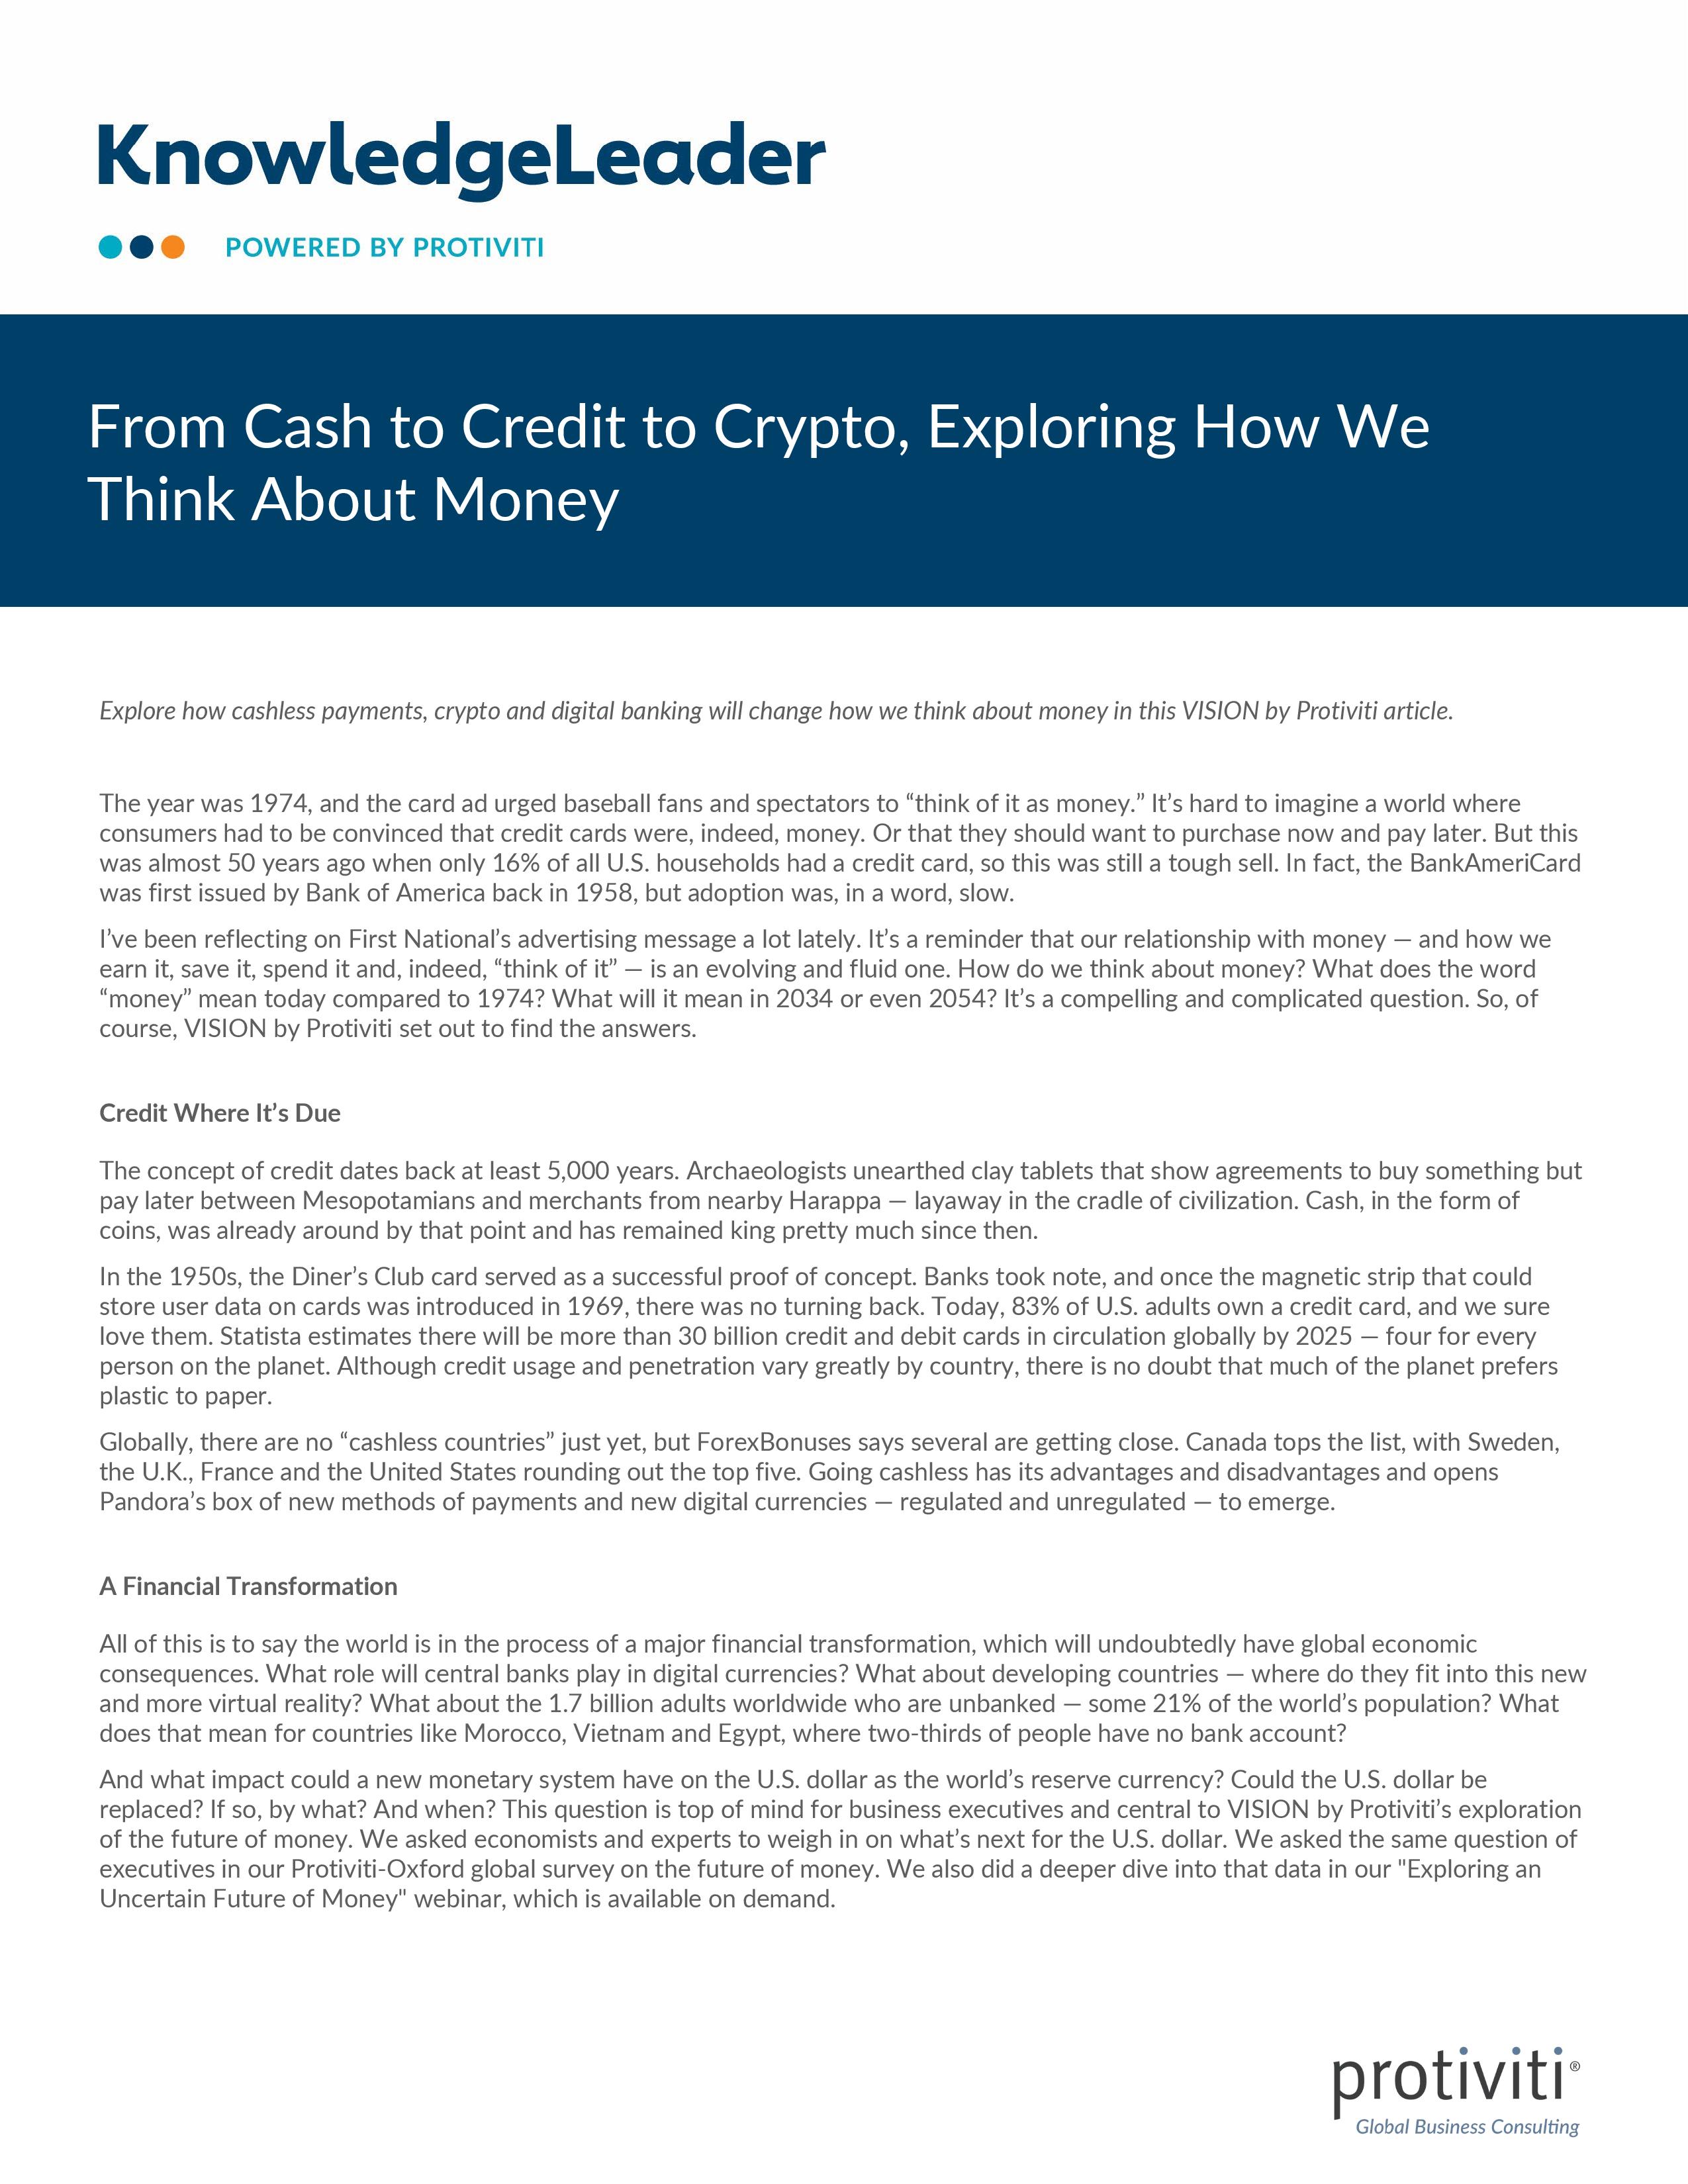 screenshot of the first page of From Cash to Credit to Crypto, Exploring How We Think About Money